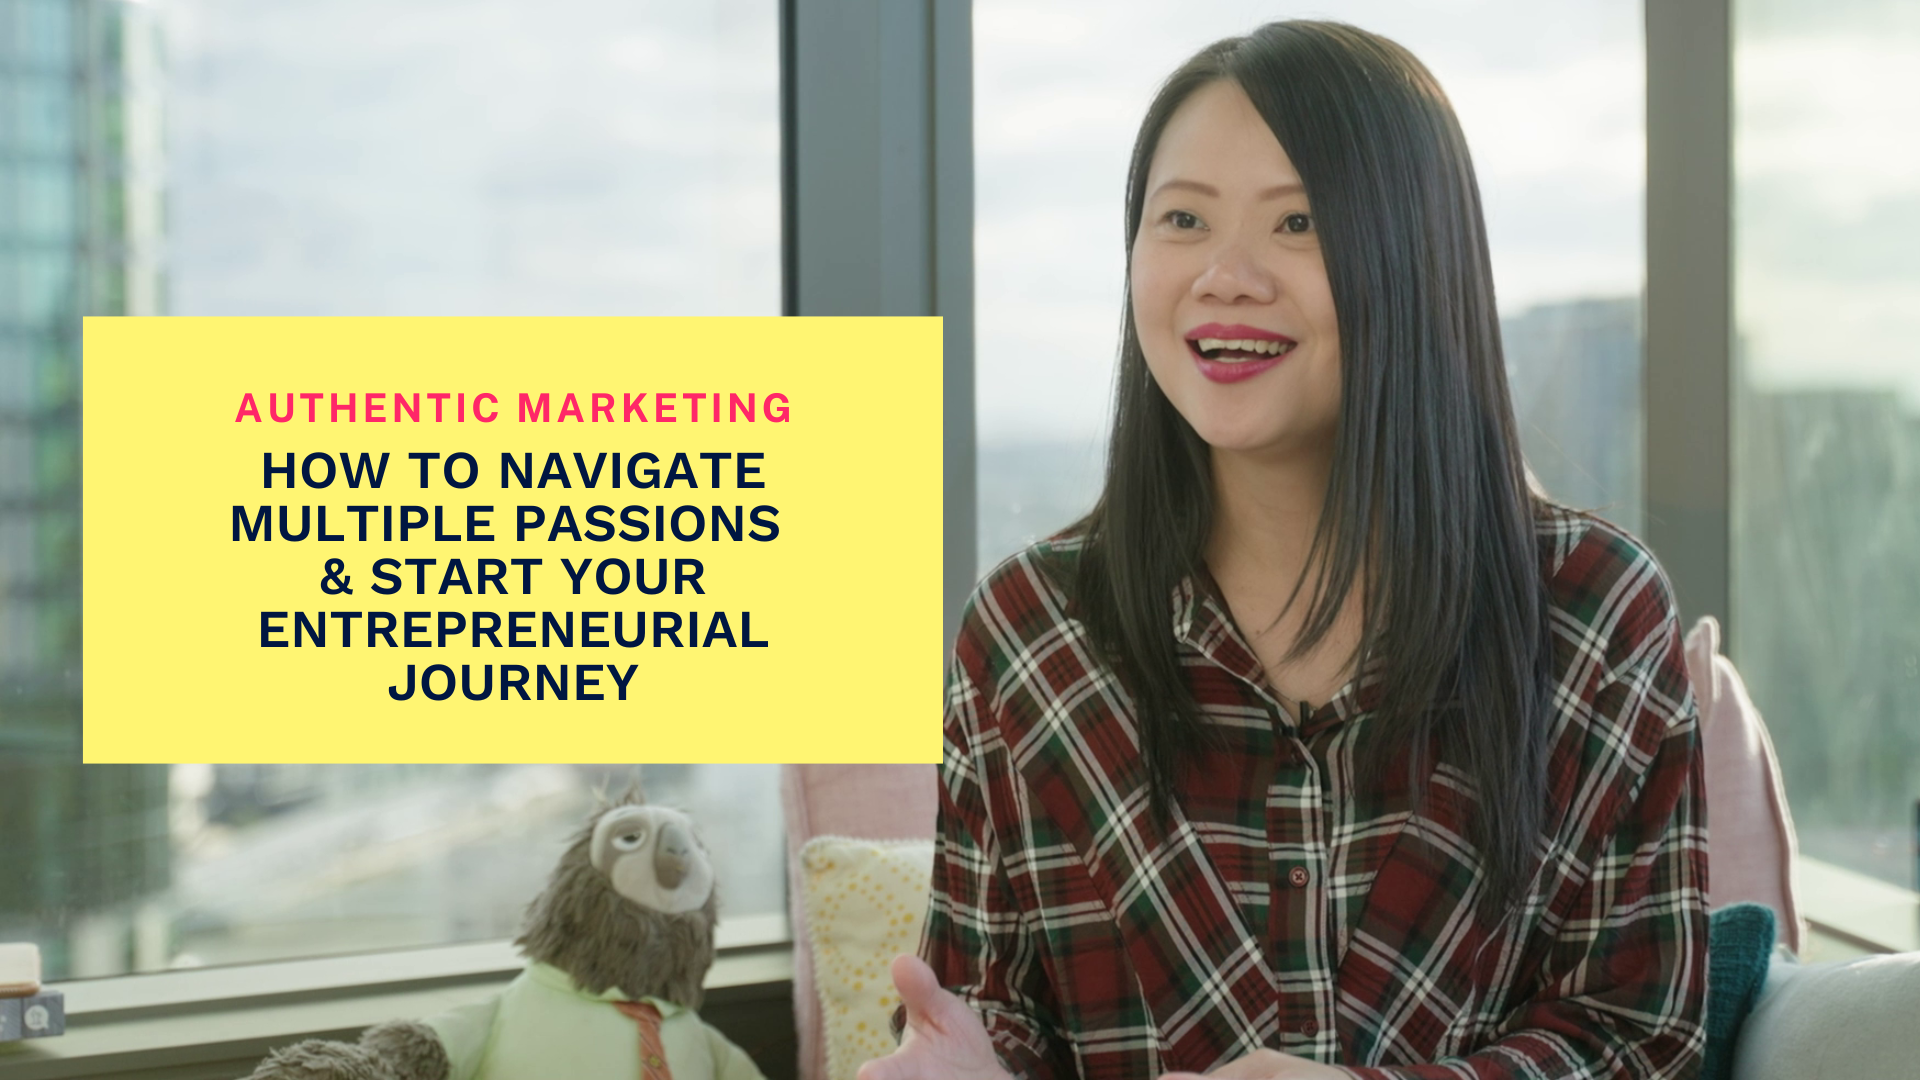 How to Navigate Multiple Passions & Start Your Entrepreneurial Journey